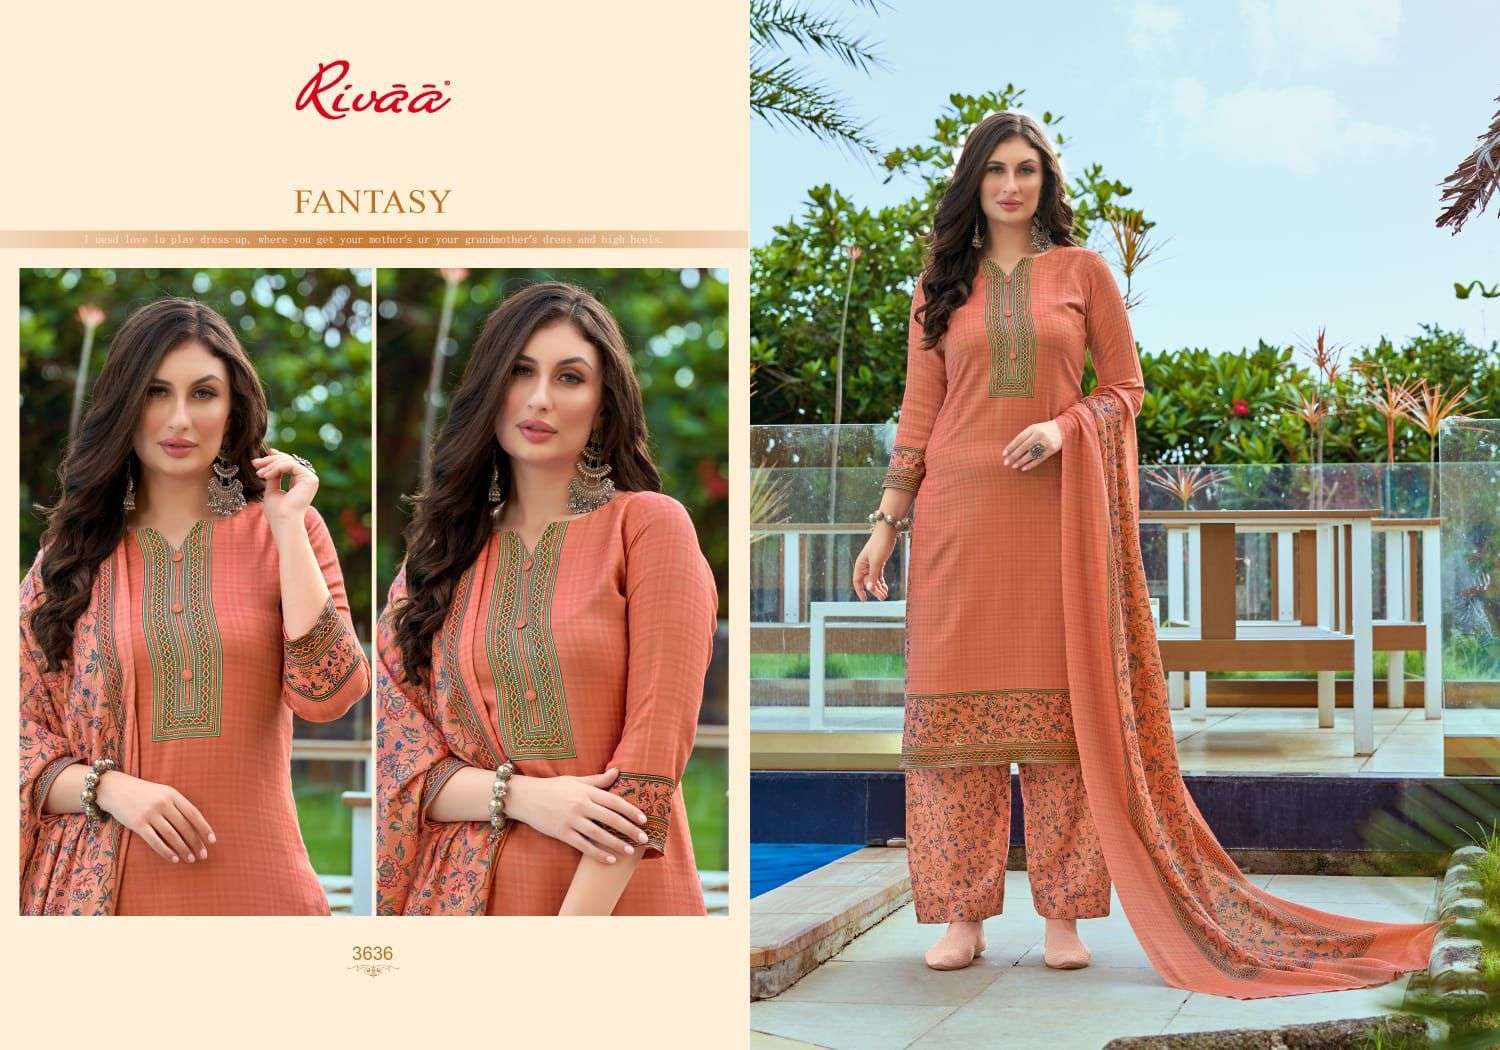 NIHAAR BY RIVAA 3636 TO 3642 SERIES BEAUTIFUL SUITS COLORFUL STYLISH FANCY CASUAL WEAR & ETHNIC WEAR PASHMINA DIGITAL PRINT DRESSES AT WHOLESALE PRICE